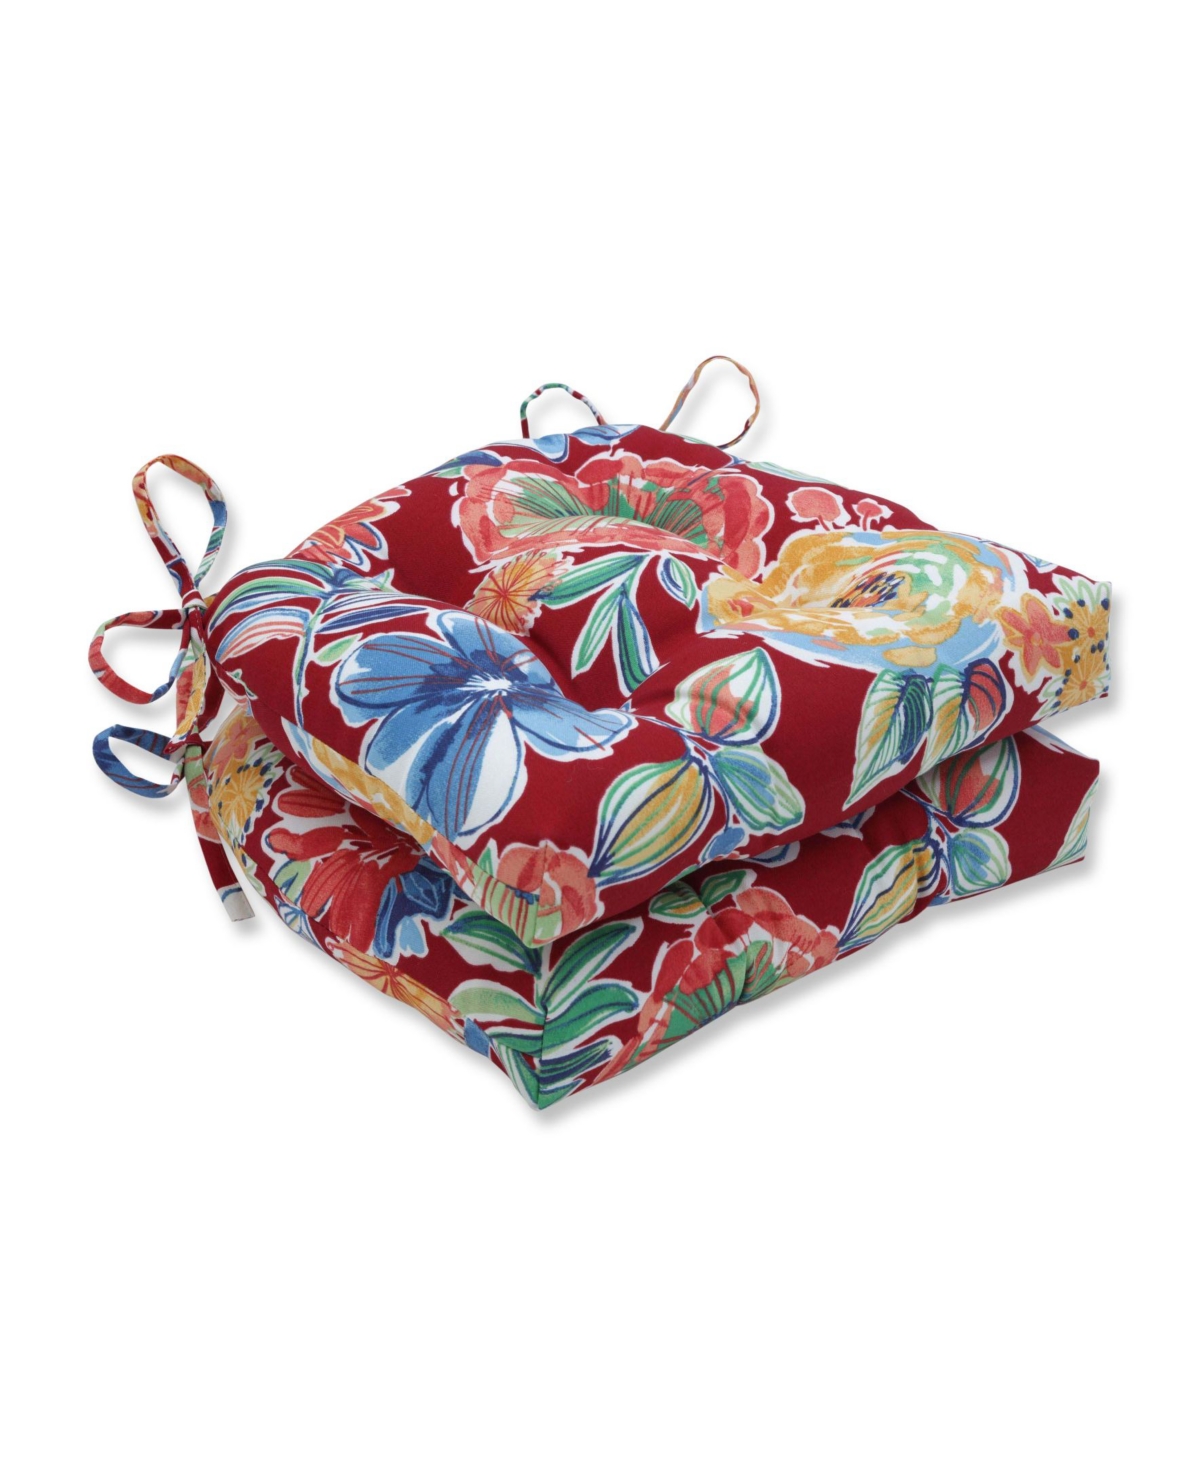 Printed 15" x 16.5" Outdoor Chair Pad Seat Cushions 2-Pack - Floral Multi